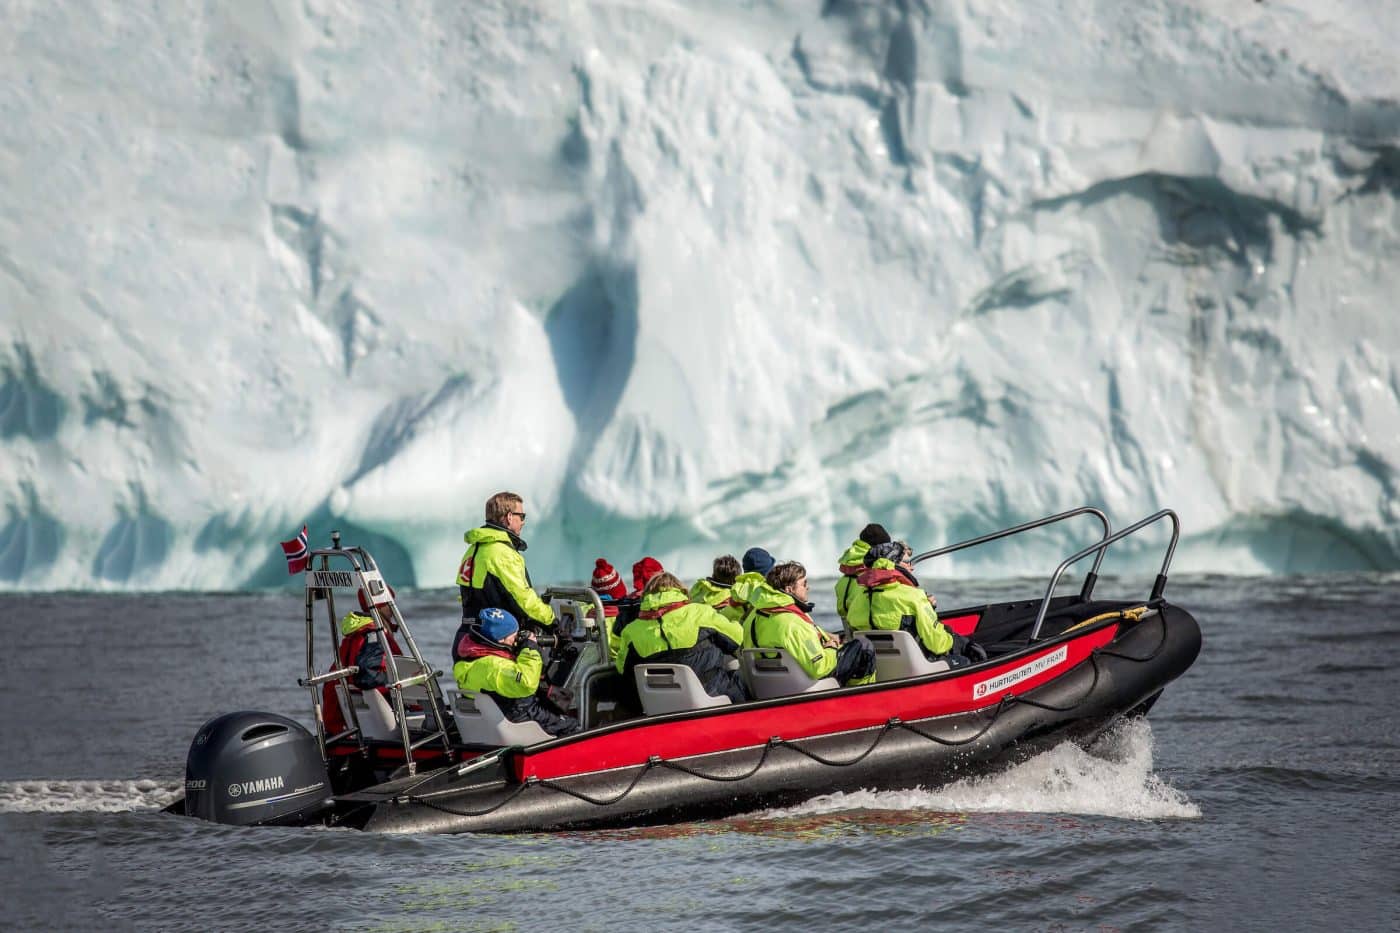 Ice cruising with MS Fram guests near Qeqertarsuaq in Greenland. Photo by Mads Pihl.